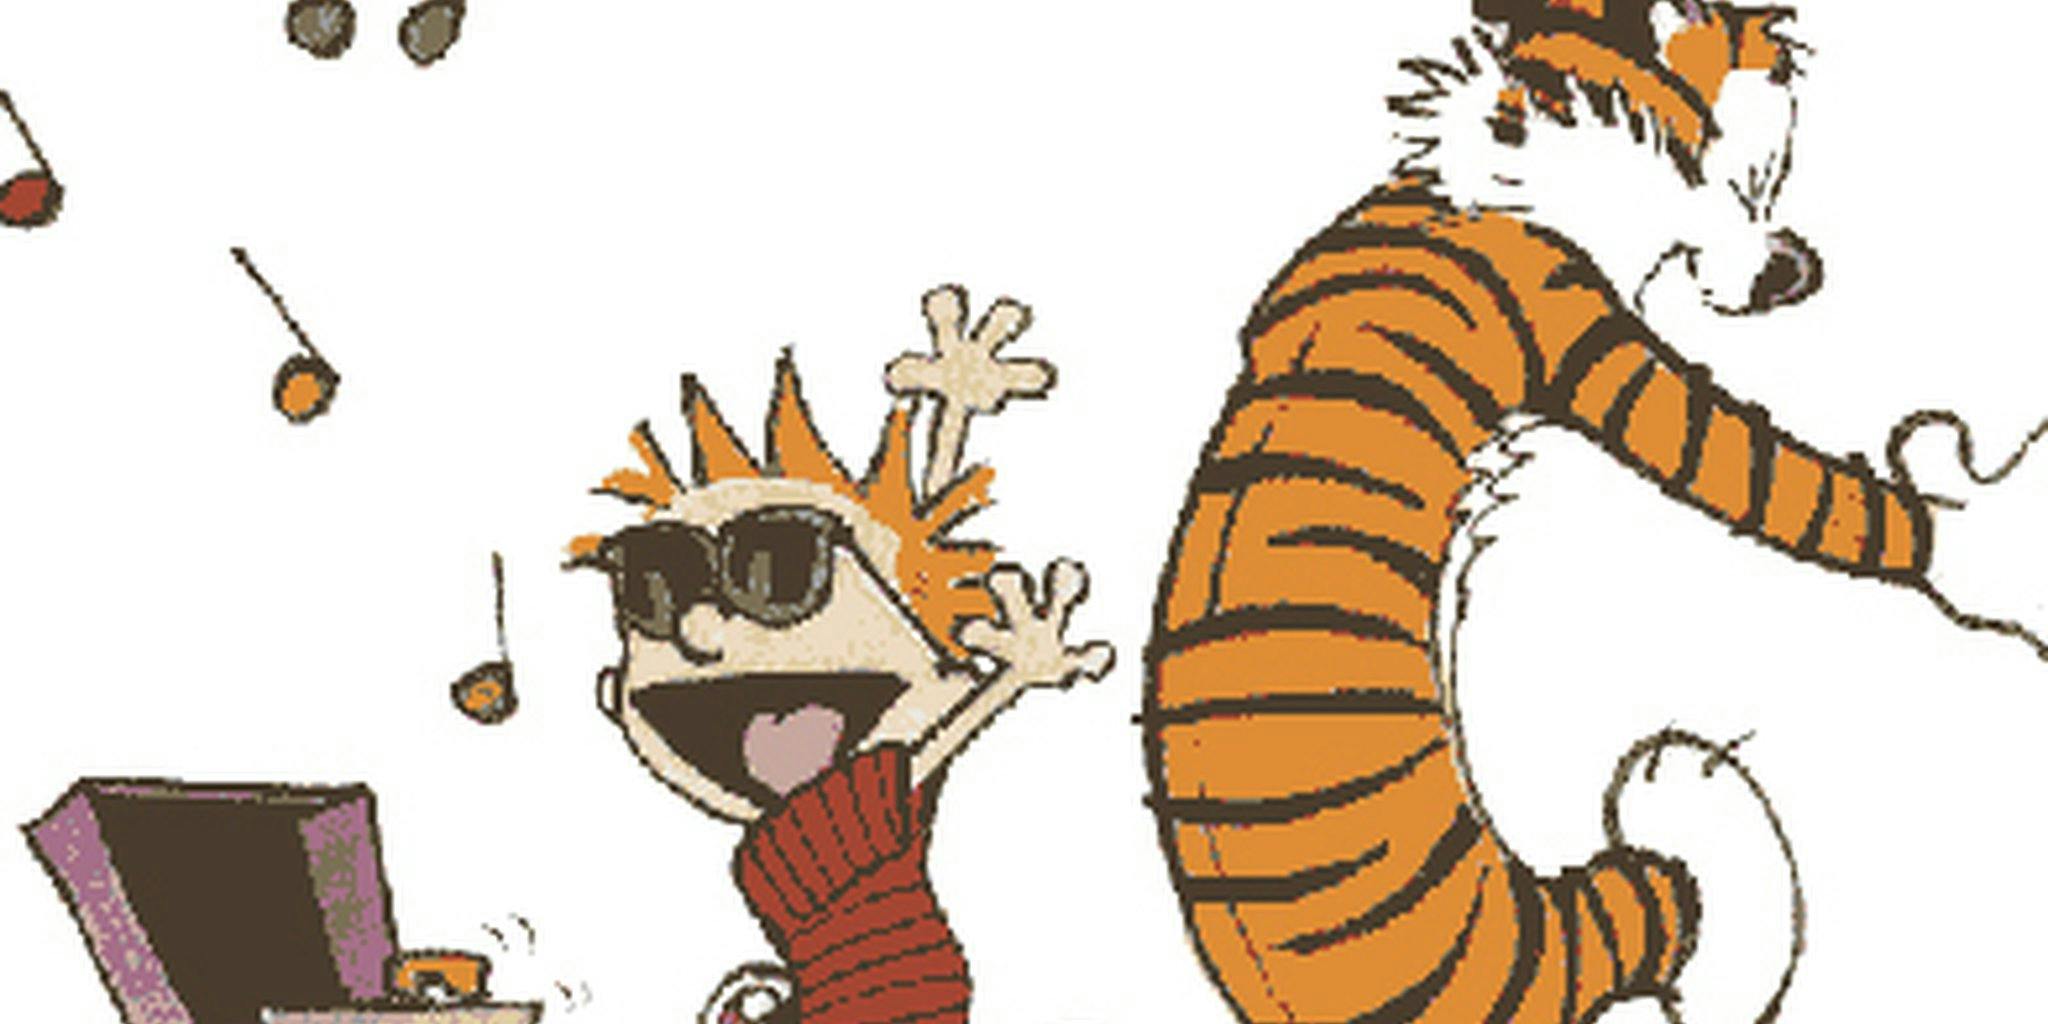 Animated GIFs bring Calvin and Hobbes to life - The Daily Dot